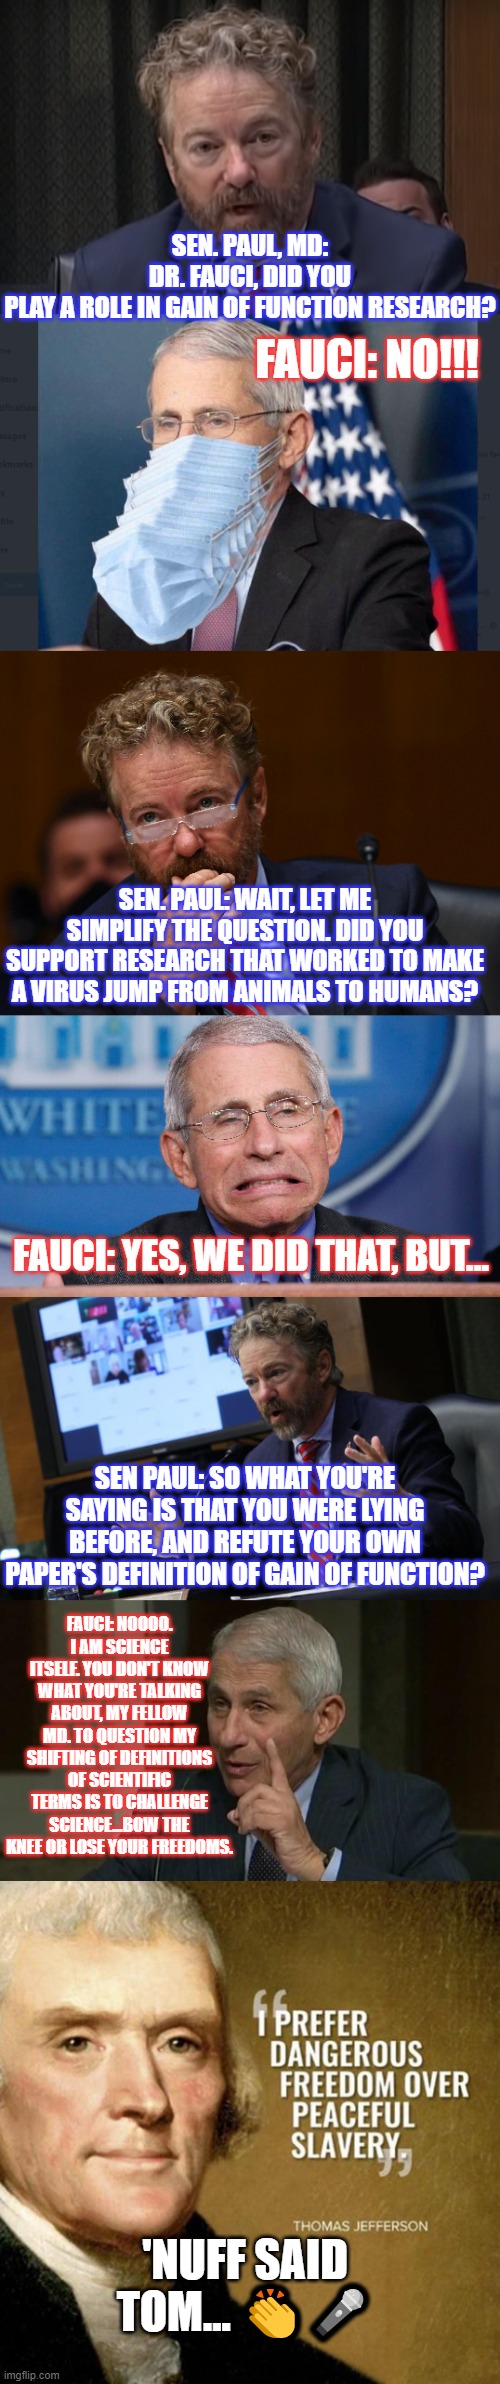 FAUCI OUCHY: A TALE OF ARROGANCE VS SCIENCE | SEN. PAUL, MD: DR. FAUCI, DID YOU PLAY A ROLE IN GAIN OF FUNCTION RESEARCH? FAUCI: NO!!! SEN. PAUL: WAIT, LET ME SIMPLIFY THE QUESTION. DID YOU SUPPORT RESEARCH THAT WORKED TO MAKE A VIRUS JUMP FROM ANIMALS TO HUMANS? FAUCI: YES, WE DID THAT, BUT... SEN PAUL: SO WHAT YOU'RE SAYING IS THAT YOU WERE LYING BEFORE, AND REFUTE YOUR OWN PAPER'S DEFINITION OF GAIN OF FUNCTION? FAUCI: NOOOO. I AM SCIENCE ITSELF. YOU DON'T KNOW WHAT YOU'RE TALKING ABOUT, MY FELLOW MD. TO QUESTION MY SHIFTING OF DEFINITIONS OF SCIENTIFIC TERMS IS TO CHALLENGE SCIENCE...BOW THE KNEE OR LOSE YOUR FREEDOMS. 'NUFF SAID TOM... 👏🎤 | image tagged in fauci,rand paul,trump,covid,vaccines,lockdowns | made w/ Imgflip meme maker